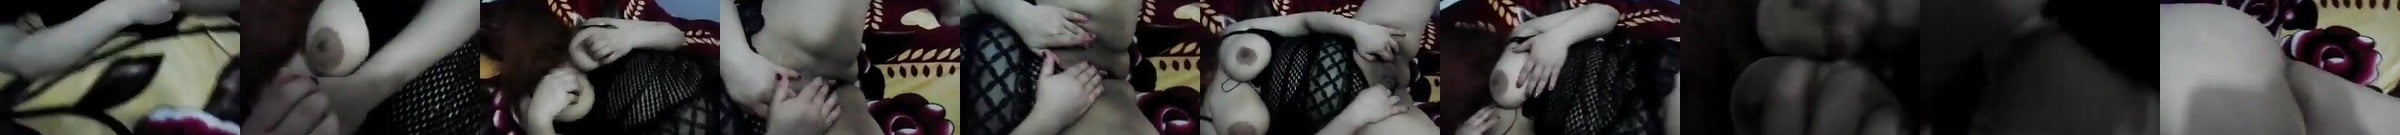 Featured Egyptian Wife Makes Video Call With Her Cuckold Husband Porn